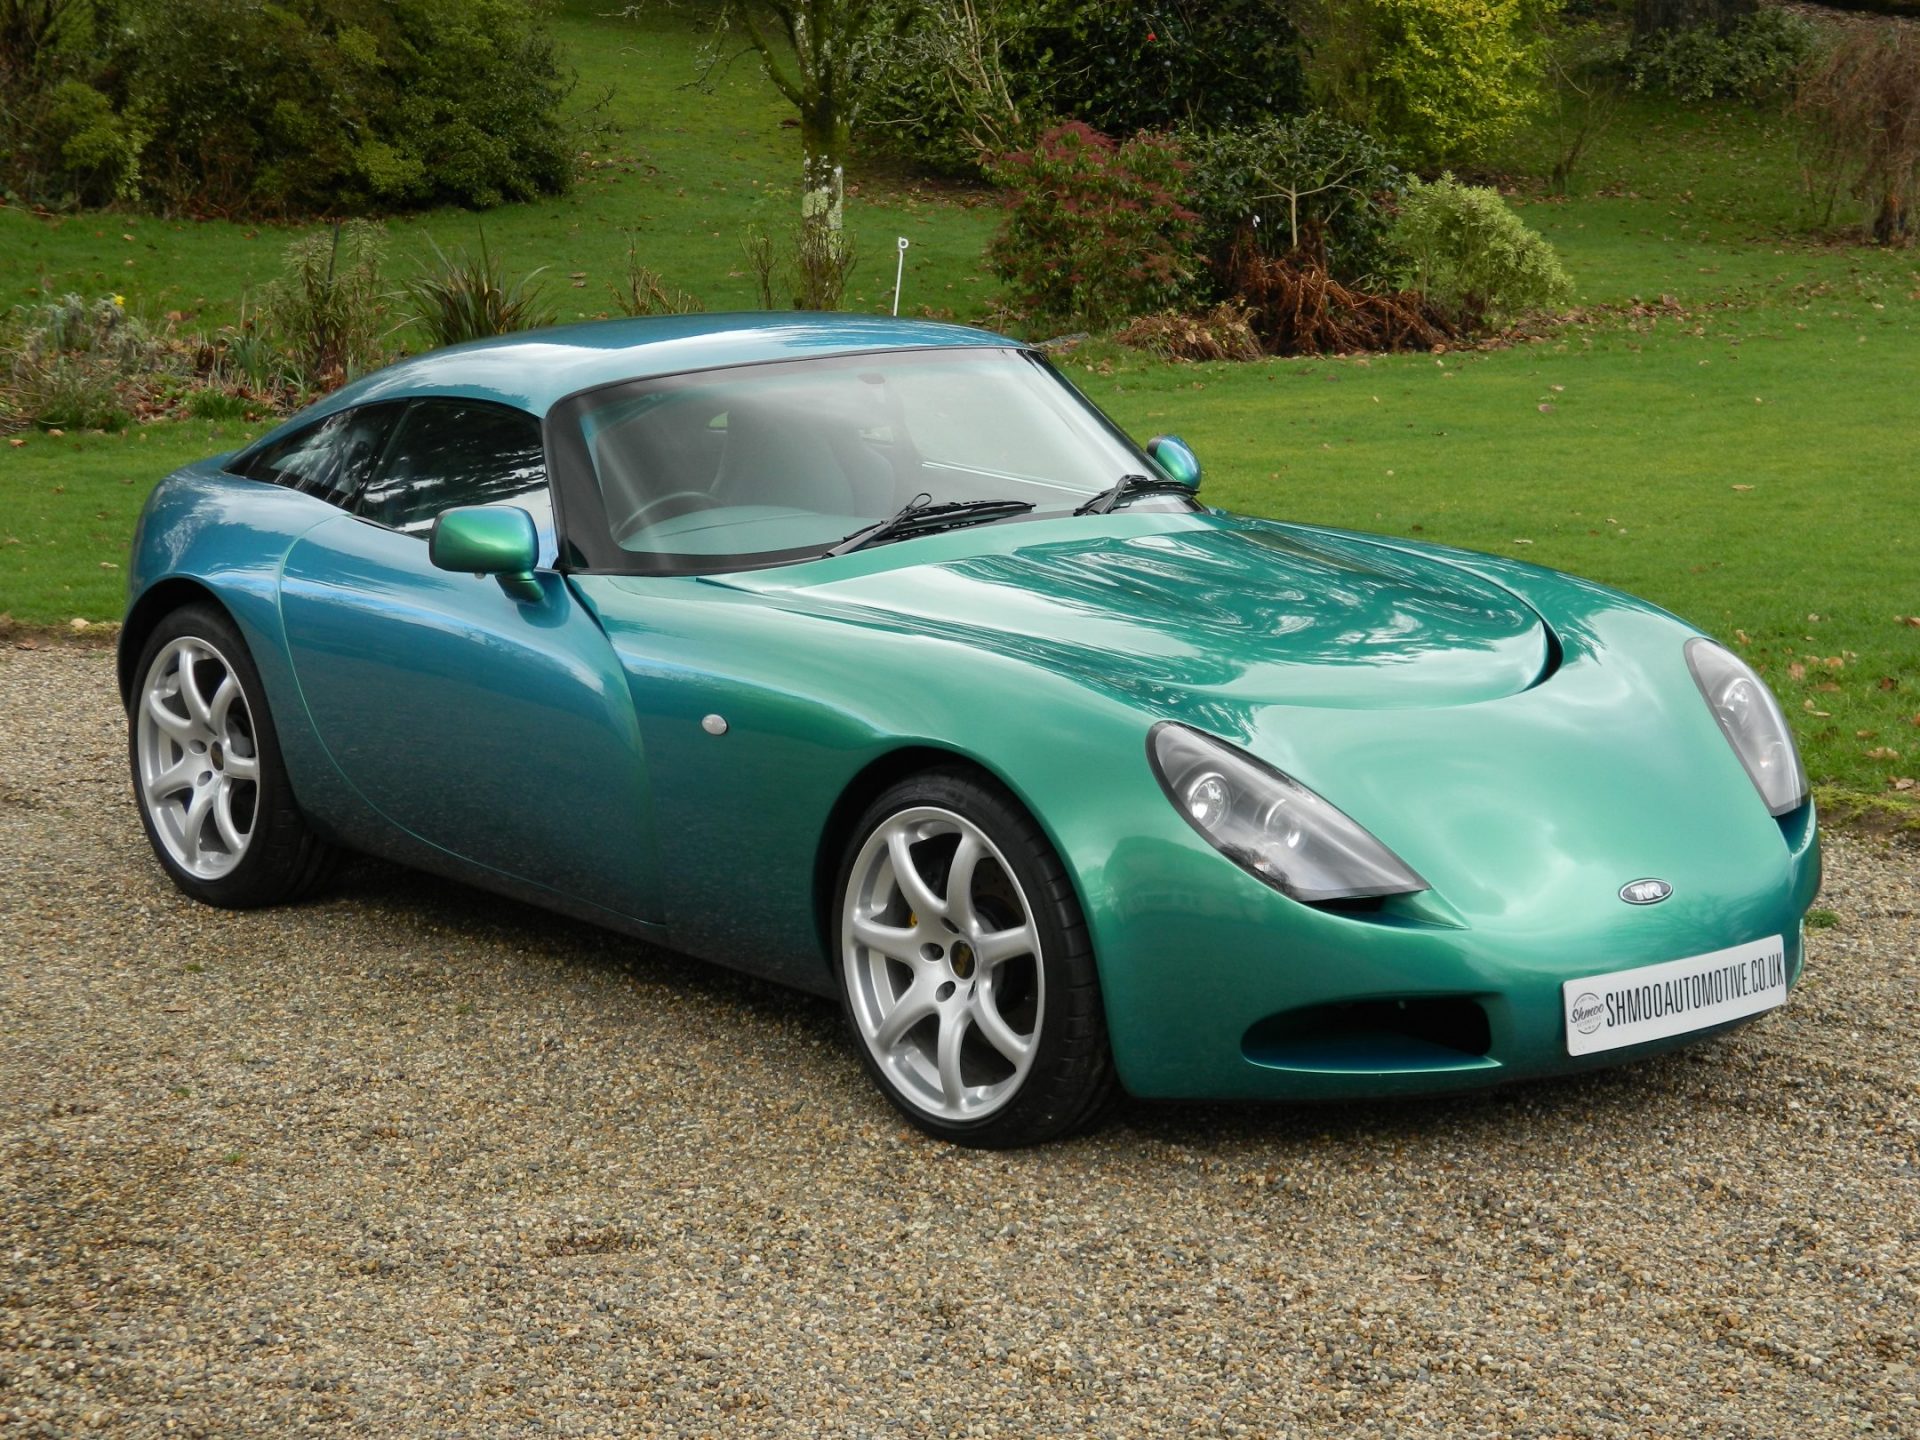 TVR T350c